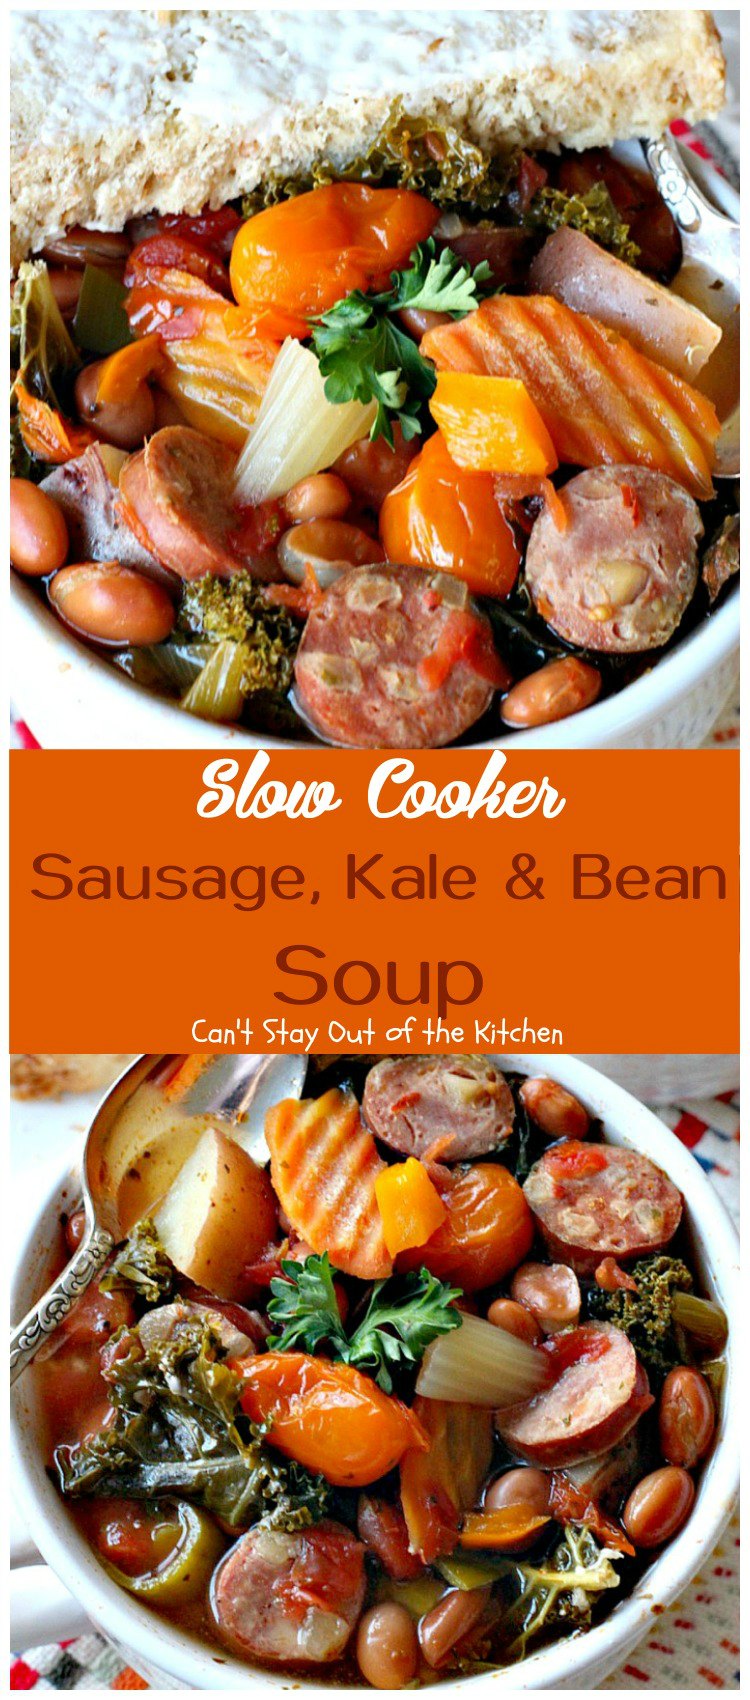 Slow Cooker Sausage, Kale & Bean Soup | Can't Stay Out of the Kitchen